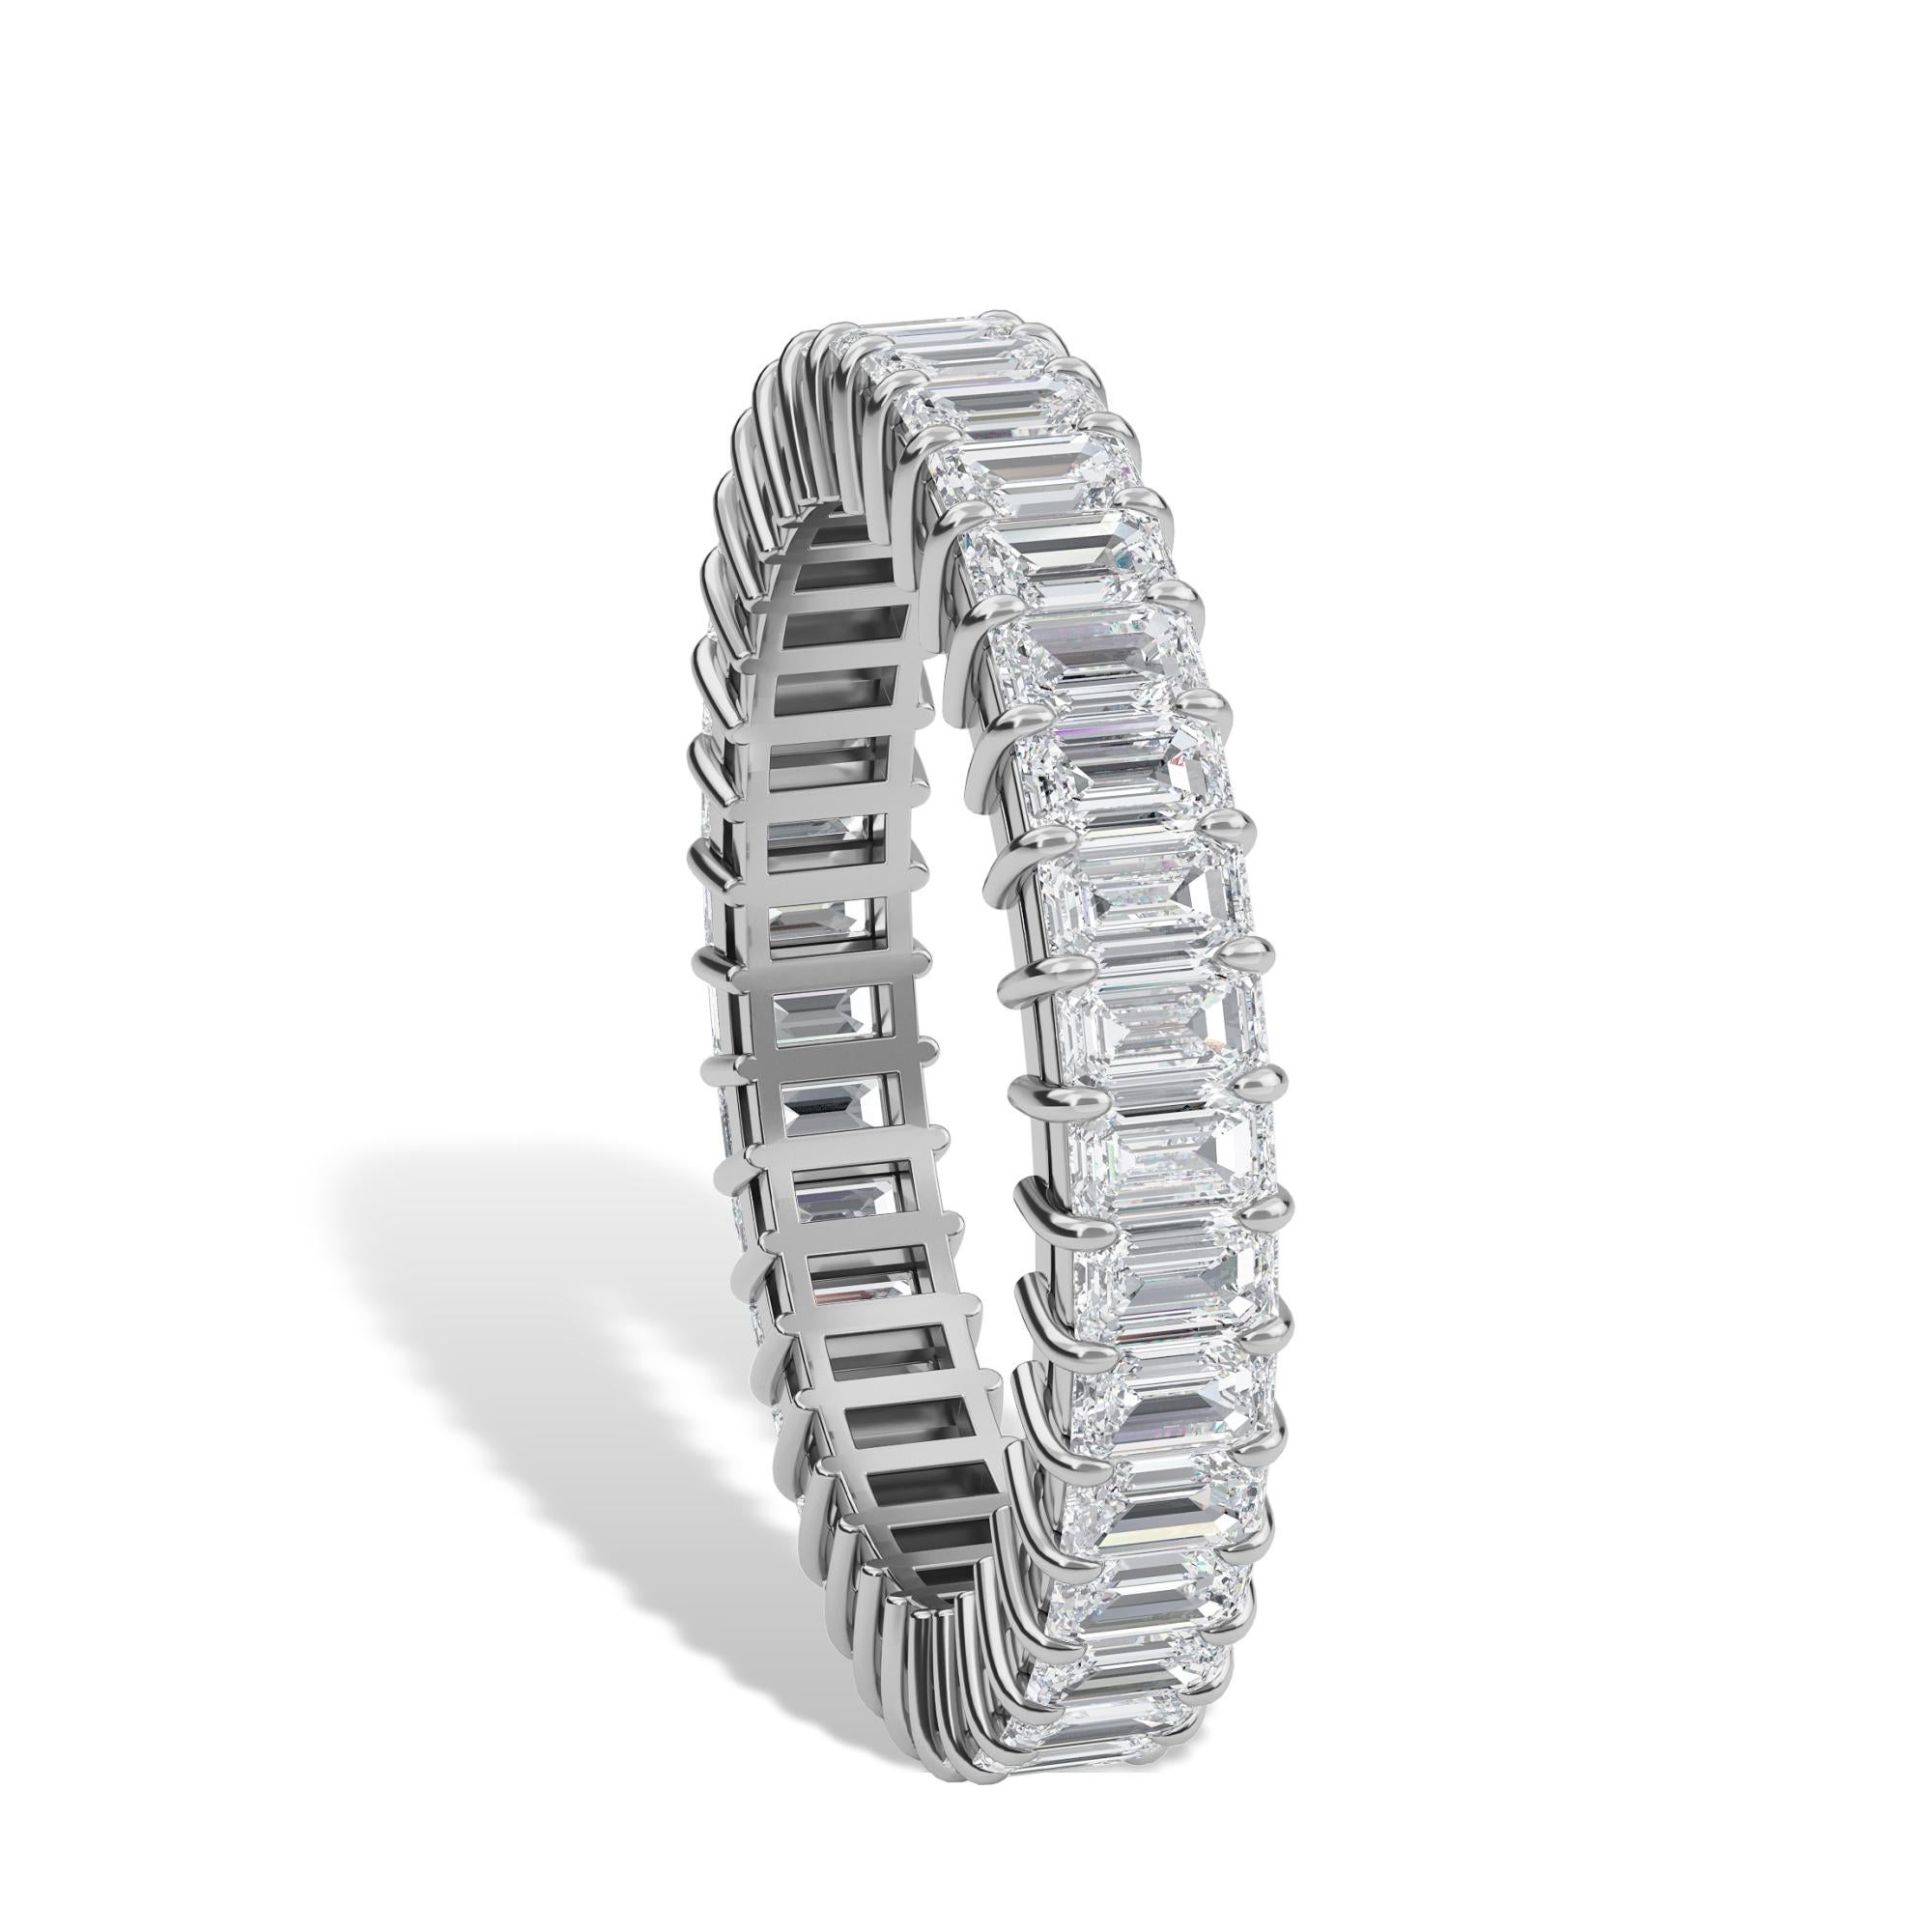 This Emerald cut diamond eternity band has 37 diamonds with a total carat weight of 2.17.
The diamonds are F Color VS clarity. The ring is a finger size 6.5 and is set in platinum.